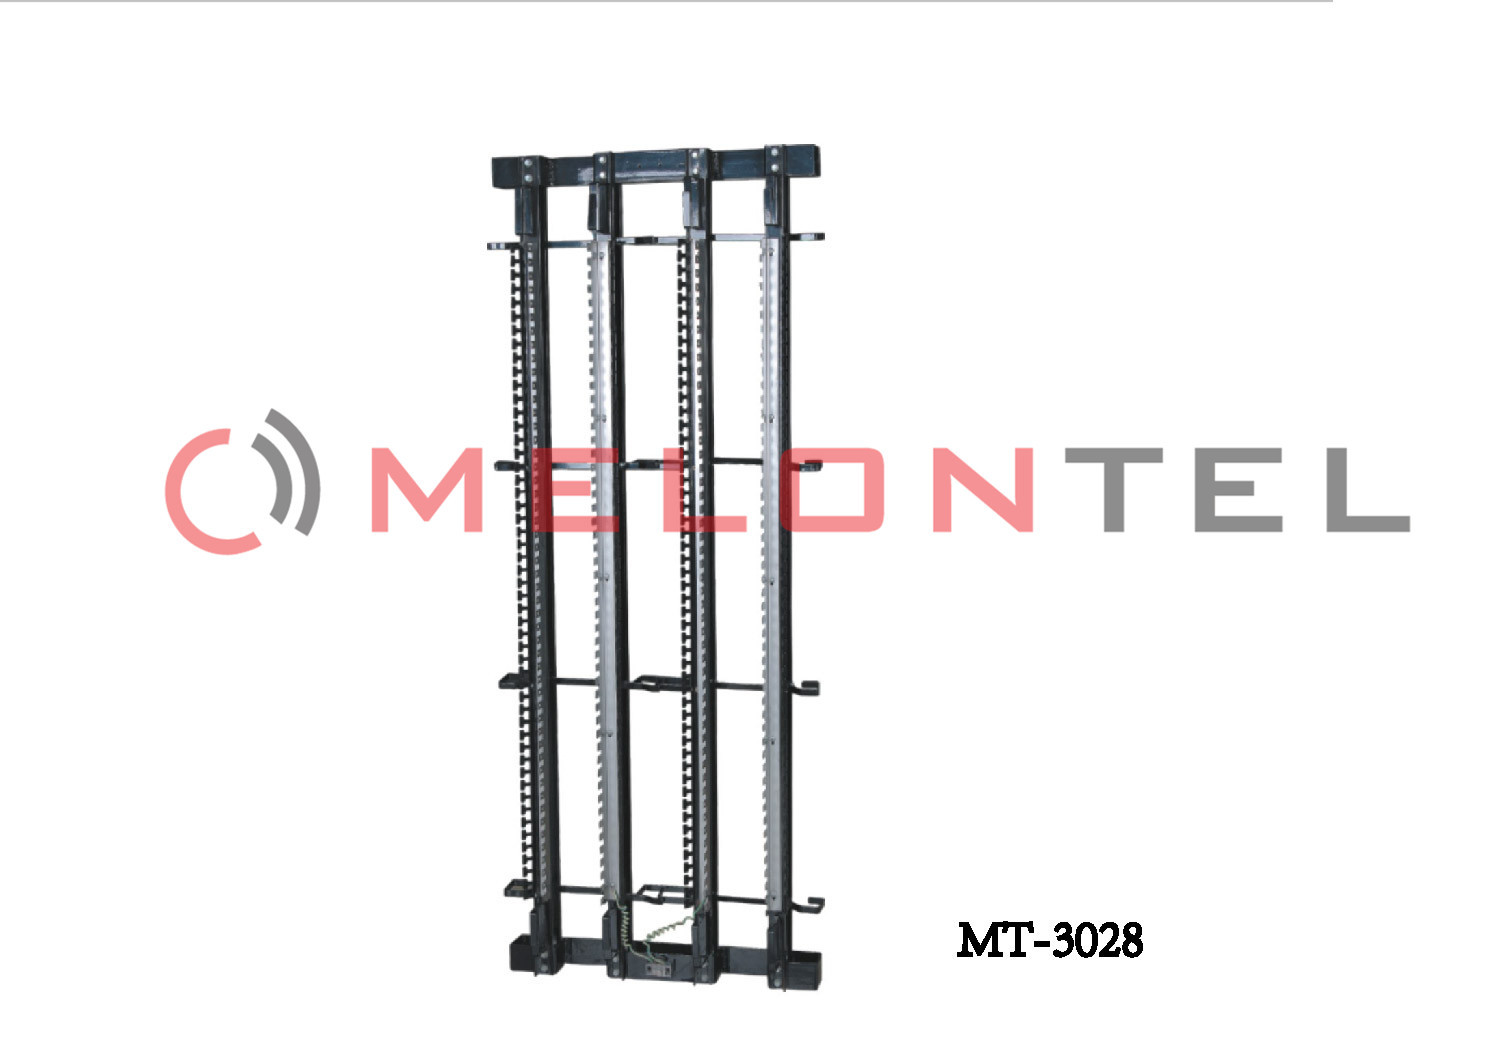 Best 1380 1400 Pair Mdf Main Distribution Frame Rack SMC Material For Krone Module wholesale